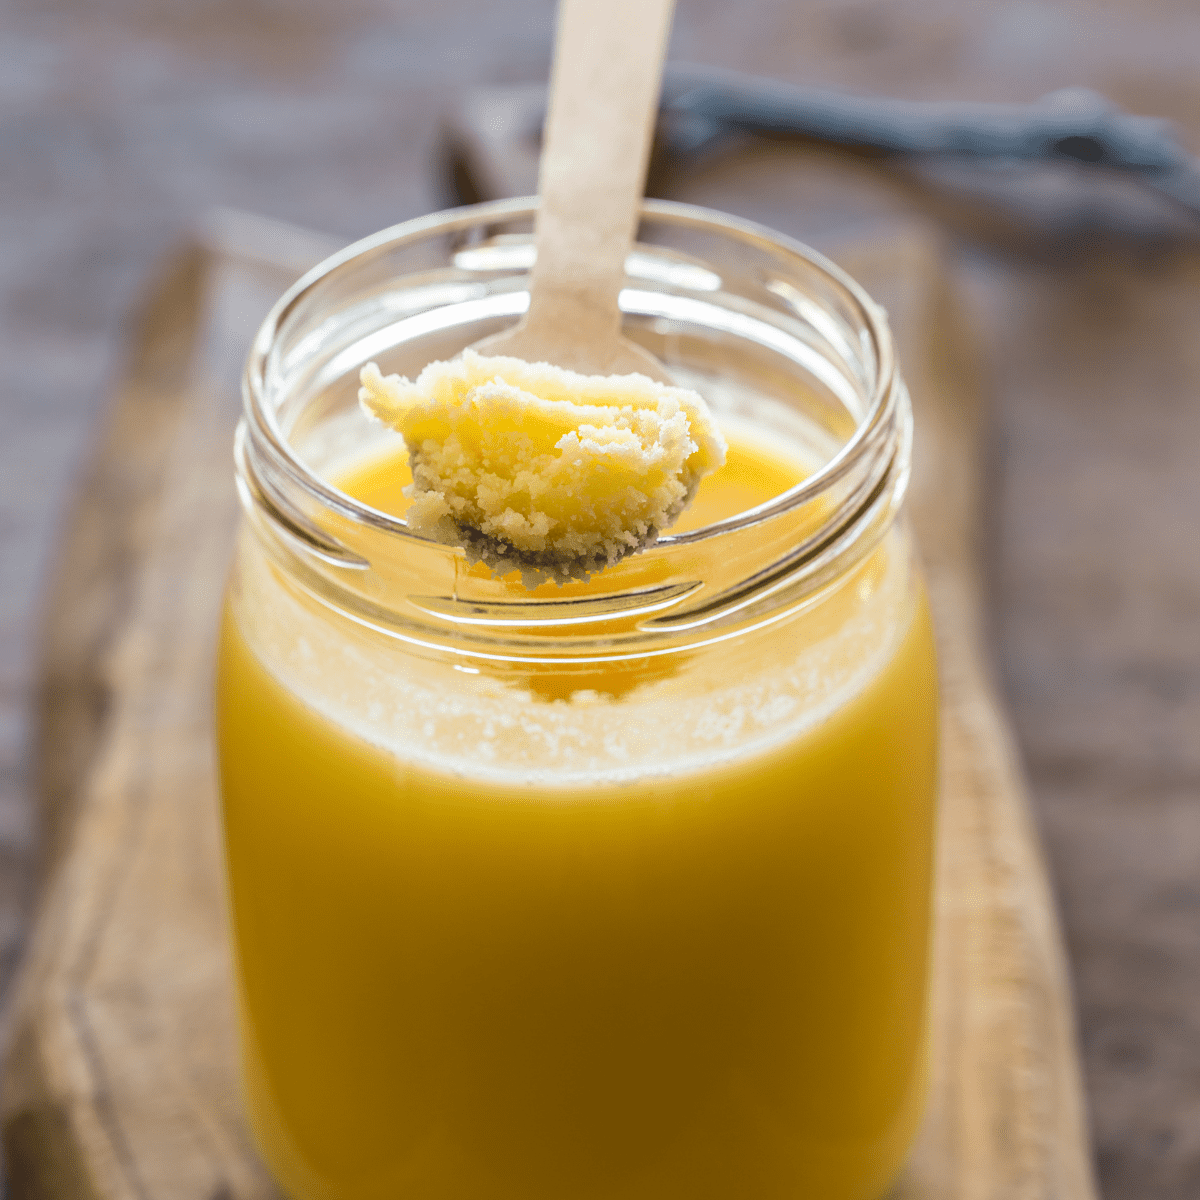 Ghee in a small glass jar with a wooden spoon.